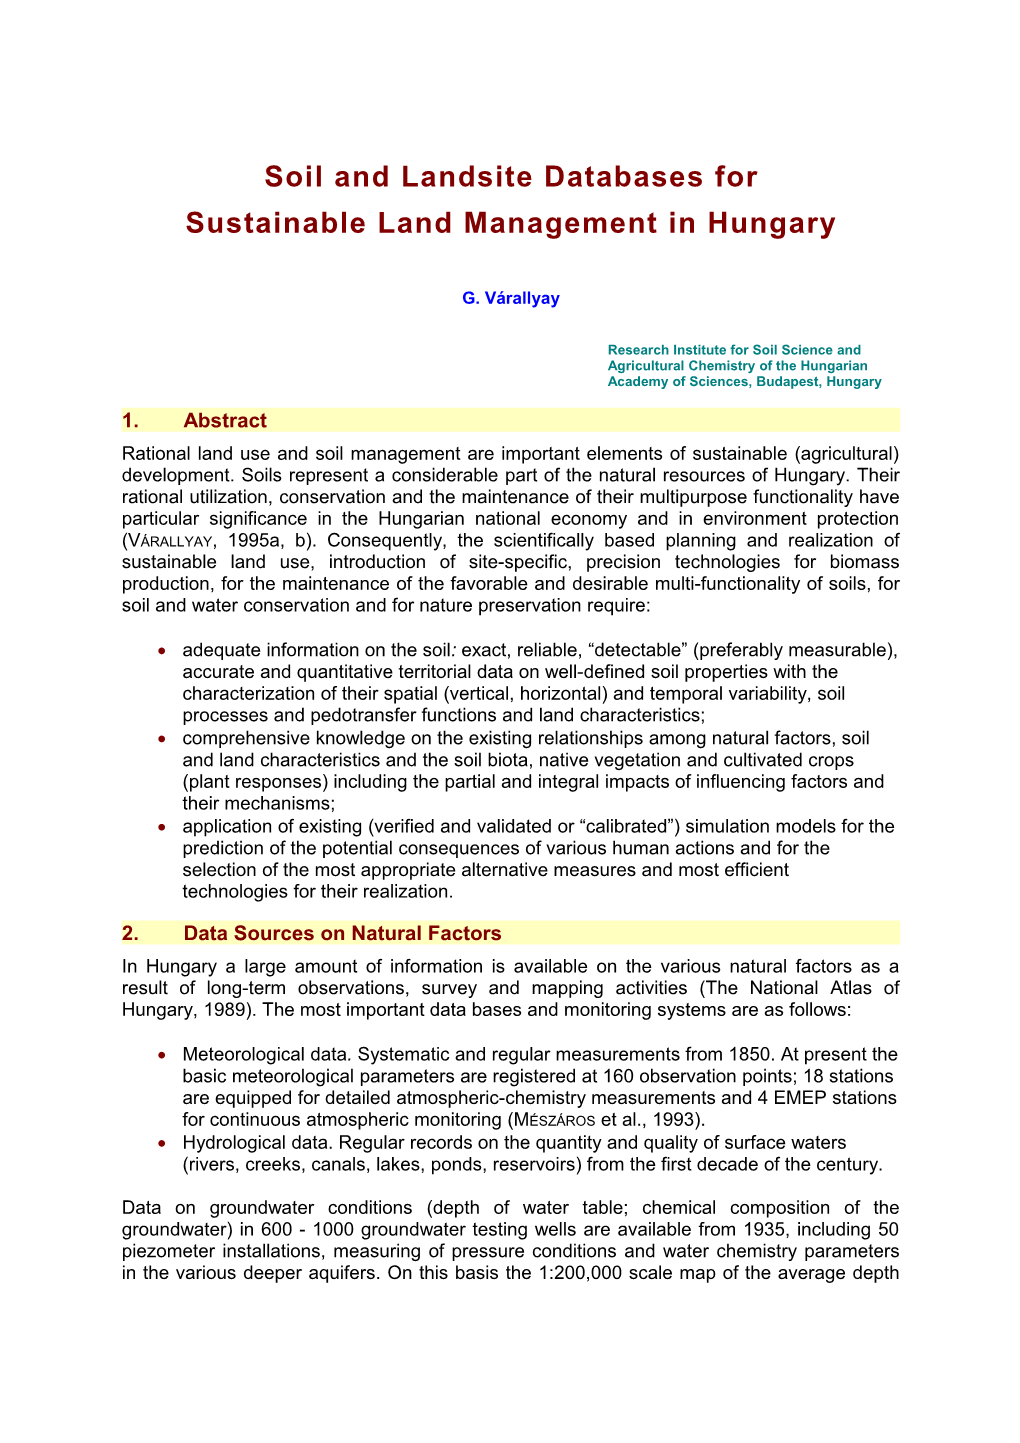 Soil and Landsite Databases for Sustainable Land Management in Hungary